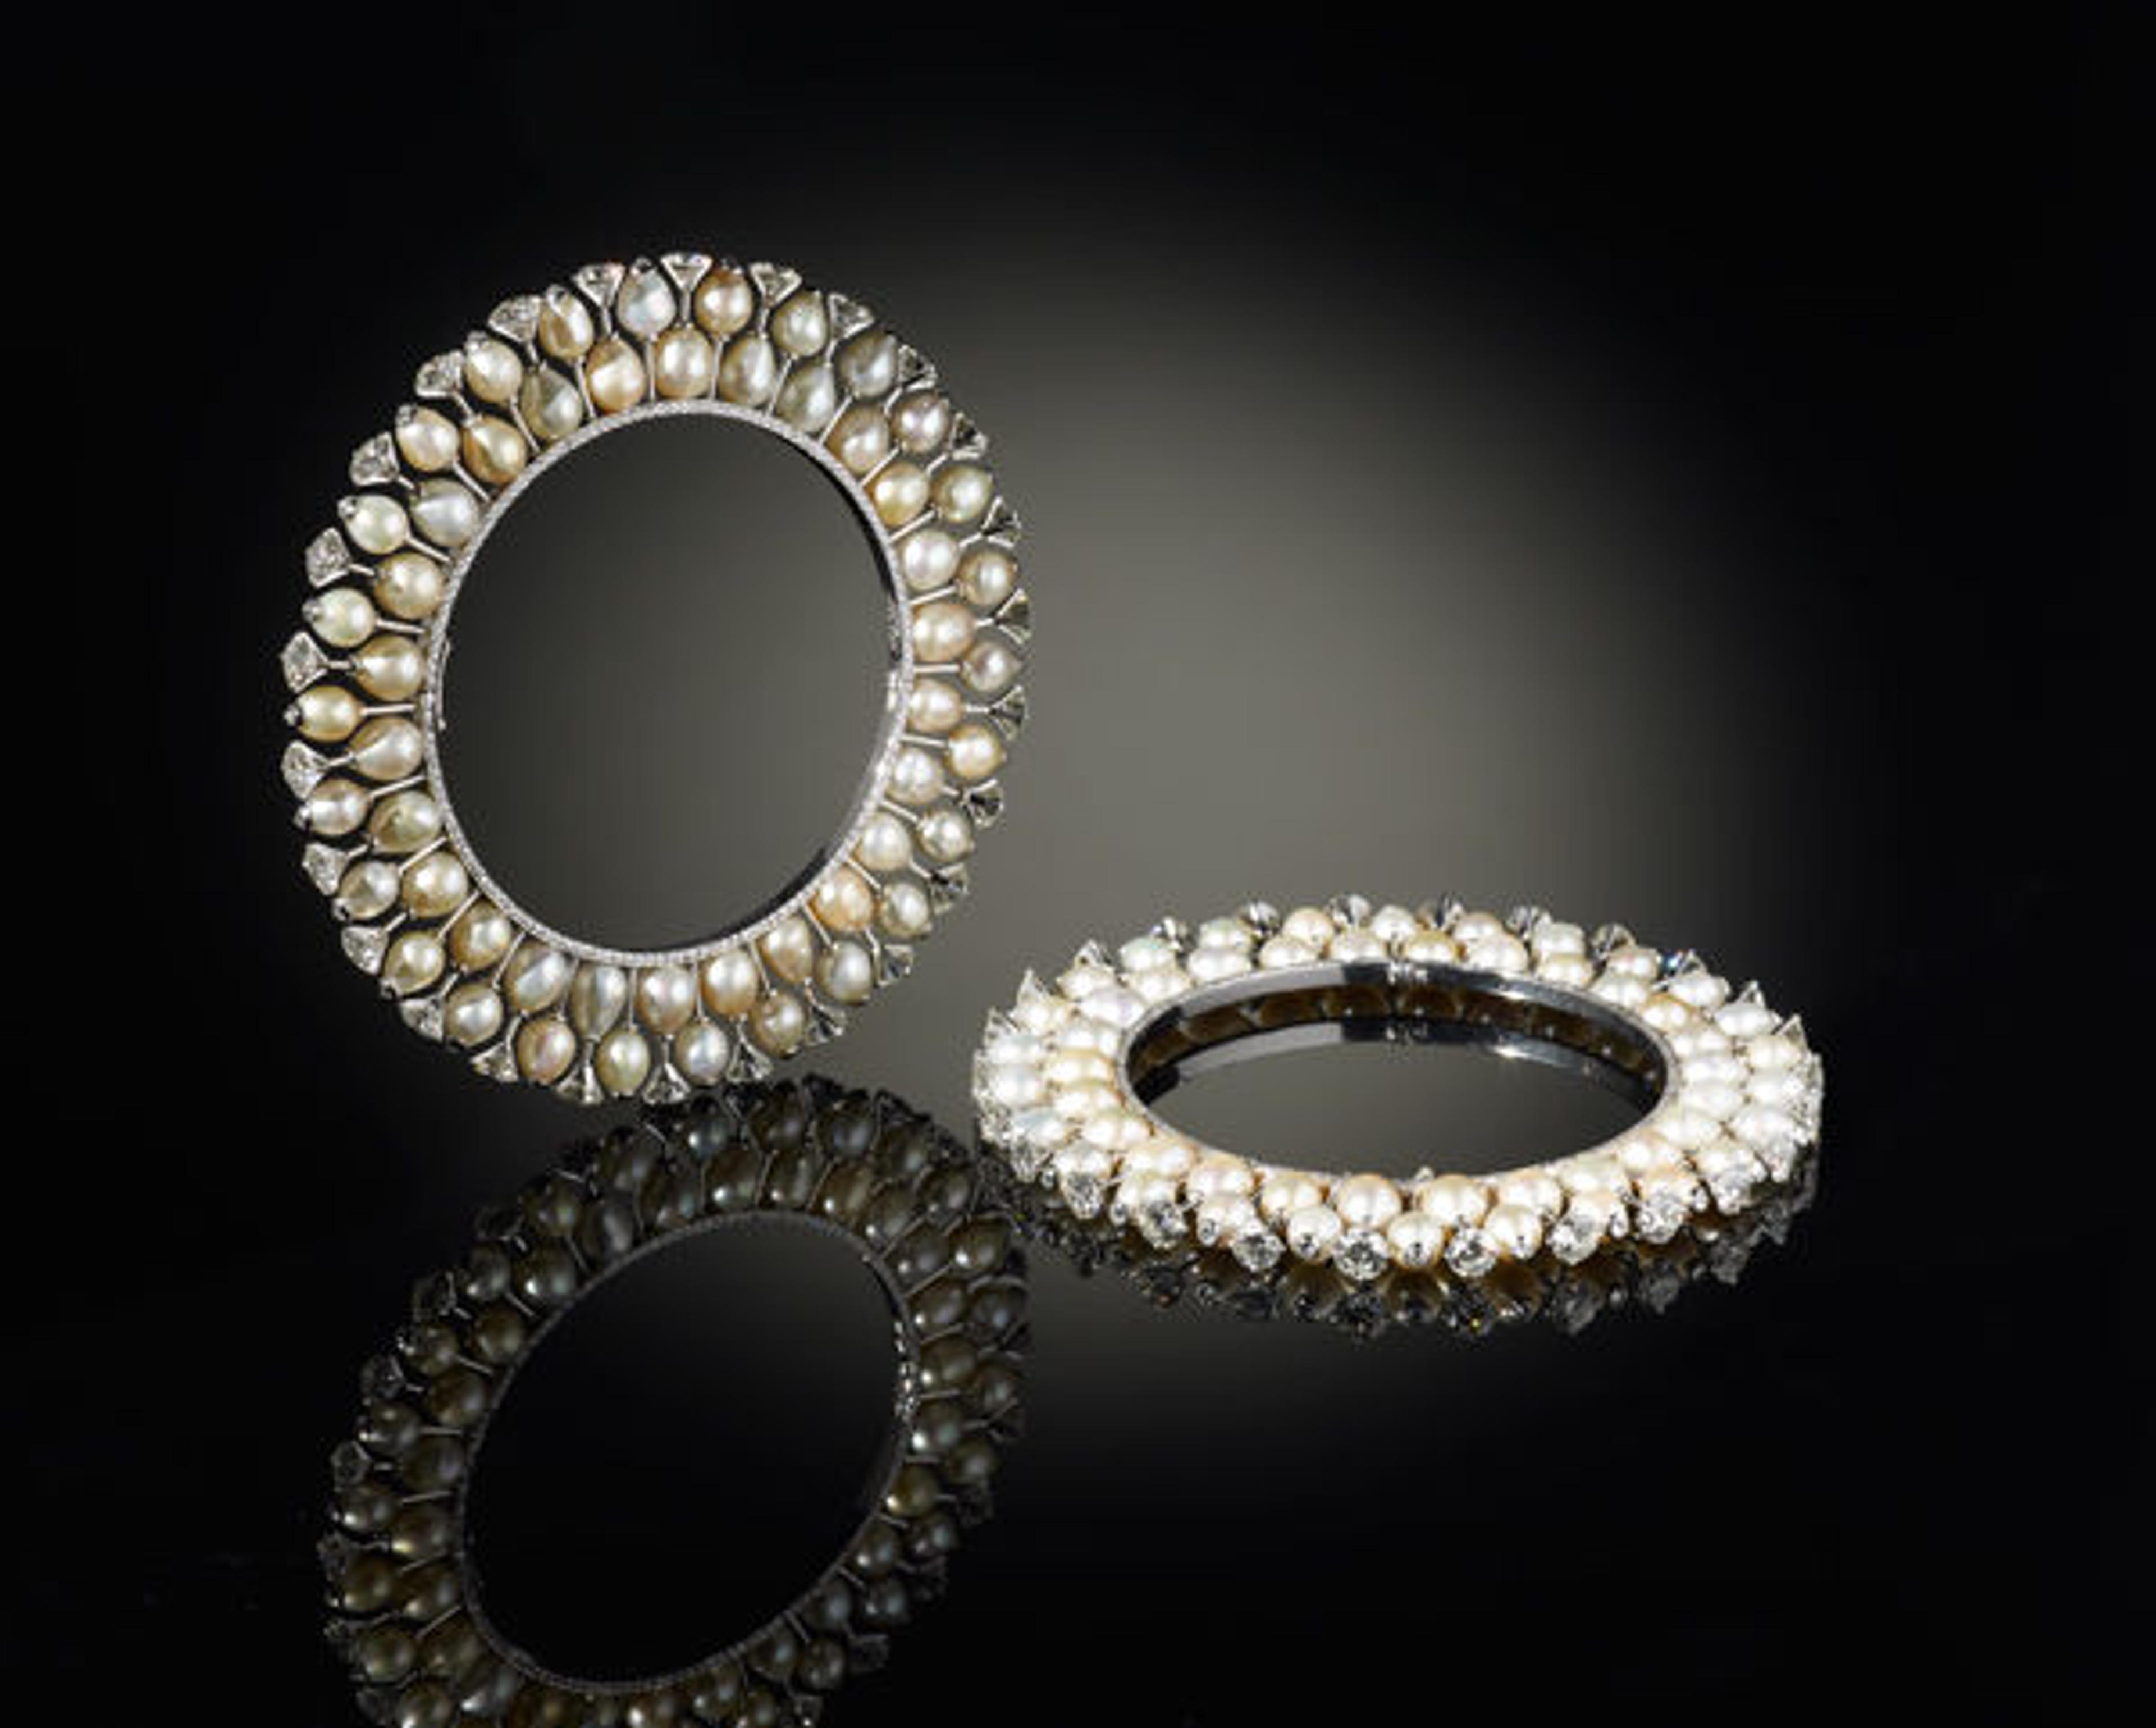 Pair of Bangles (kada) by Bhagat, 2012. India, Mumbai. Platinum, set with diamonds and pearls; Diam. 3 3/8 in. (8.6 cm). The Al-Thani Collection.